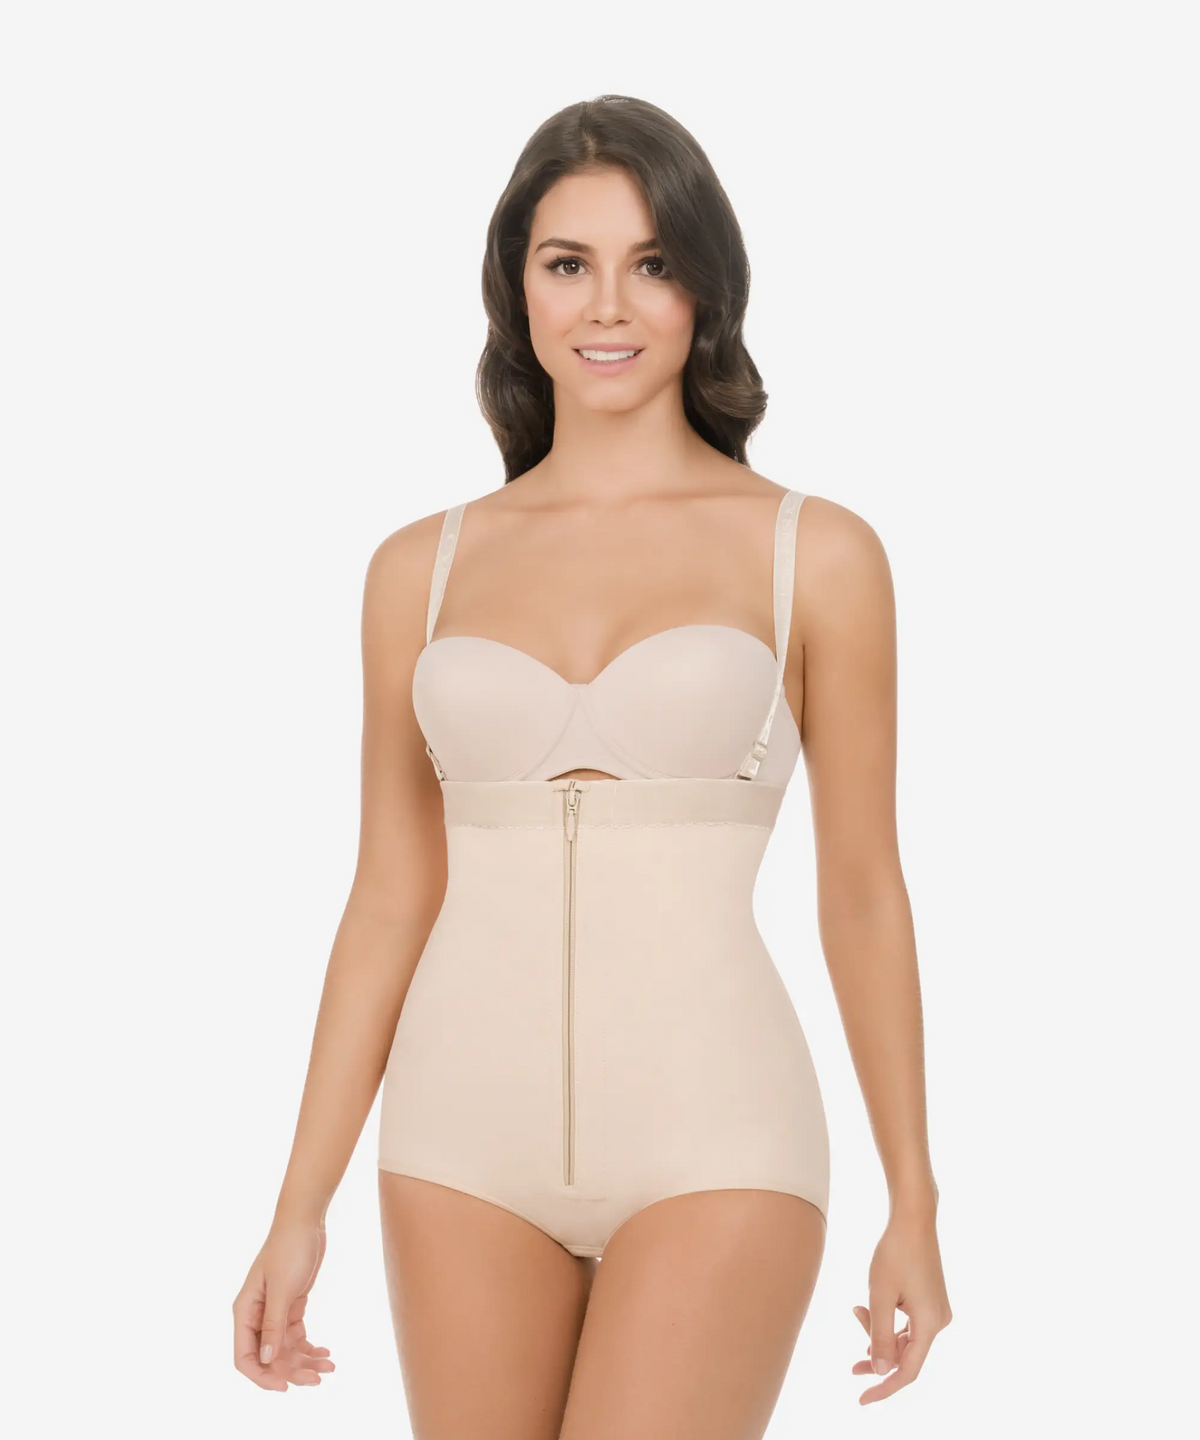 Plus Size Zipper Breasted 9 Bone Body Shaping Straps Body Shaper Tight  Fitting Tummy Control Body Shaper - The Little Connection